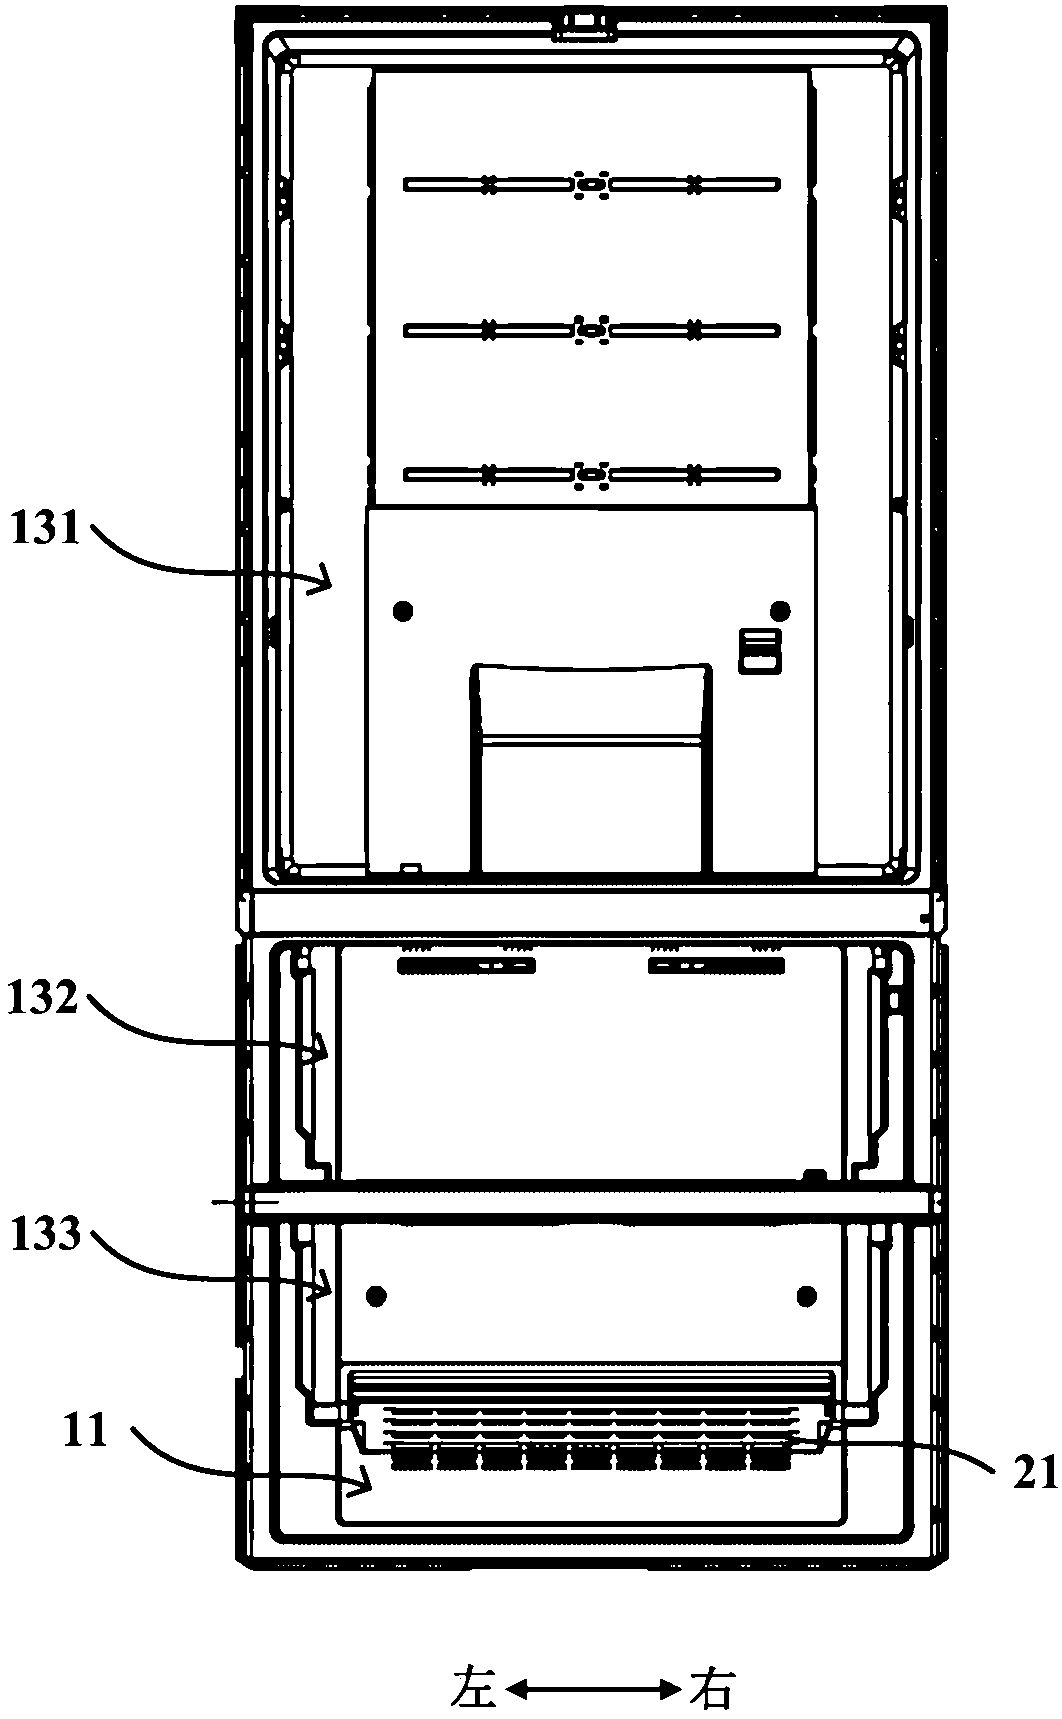 Refrigerator with improved air flue structure